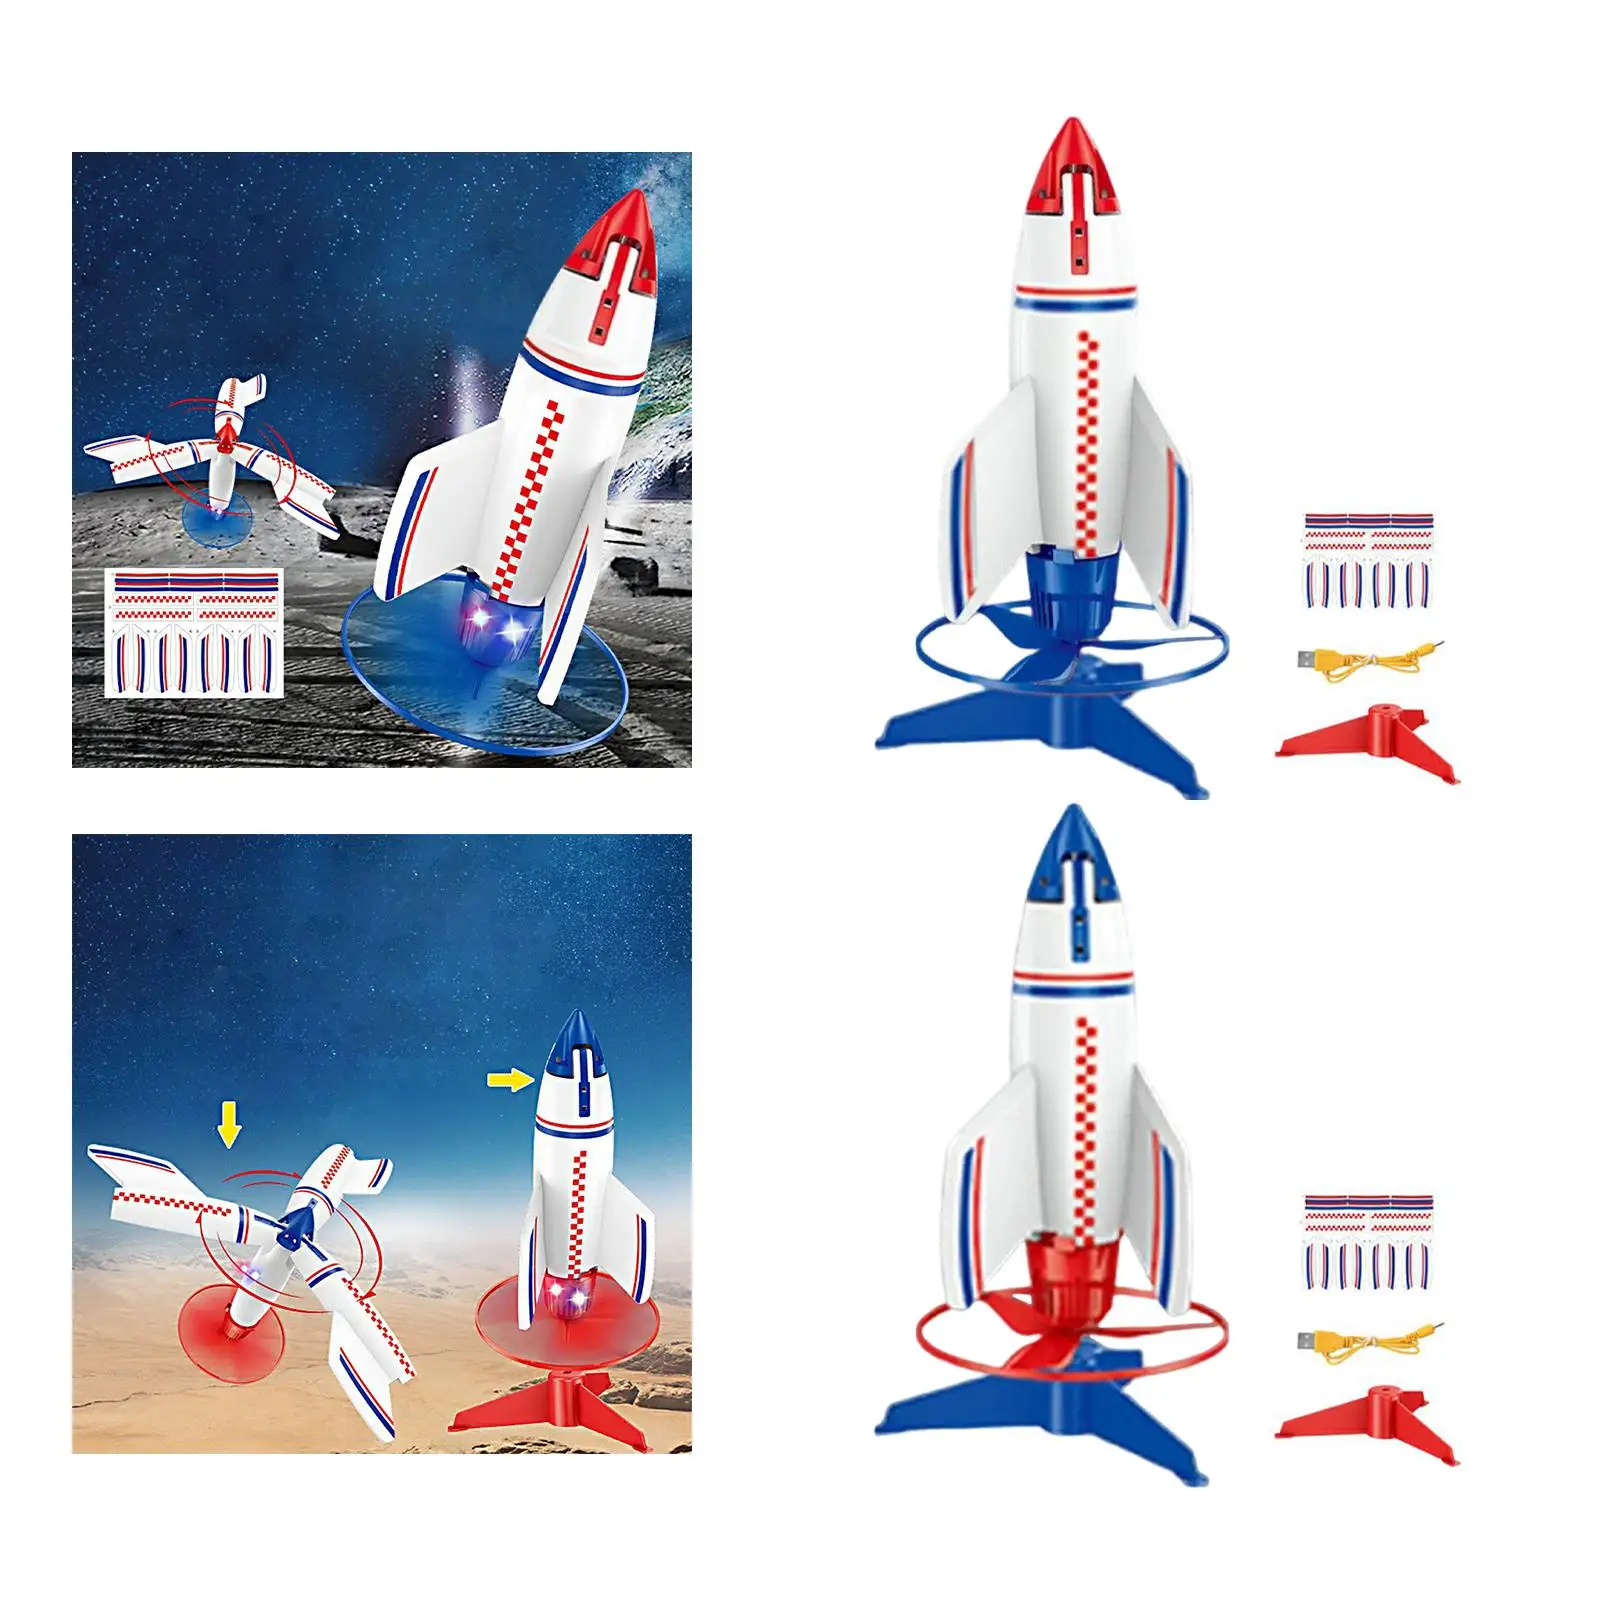 rocket Launcher Toys Games Activities Party Birthday Gifts Toys